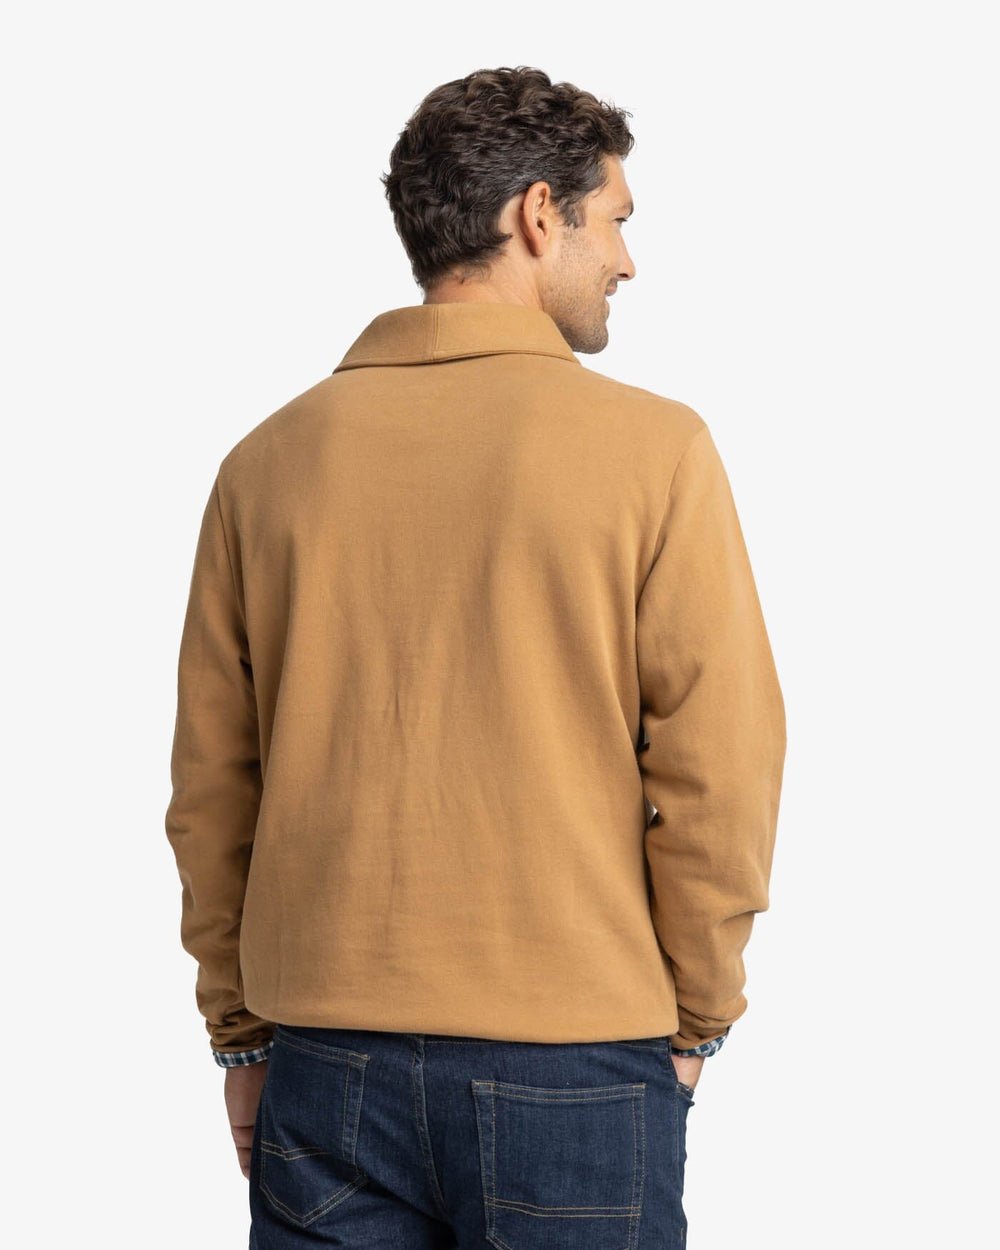 The back view of the Southern Tide Stanley Pullover by Southern Tide - Hazelnut Khaki